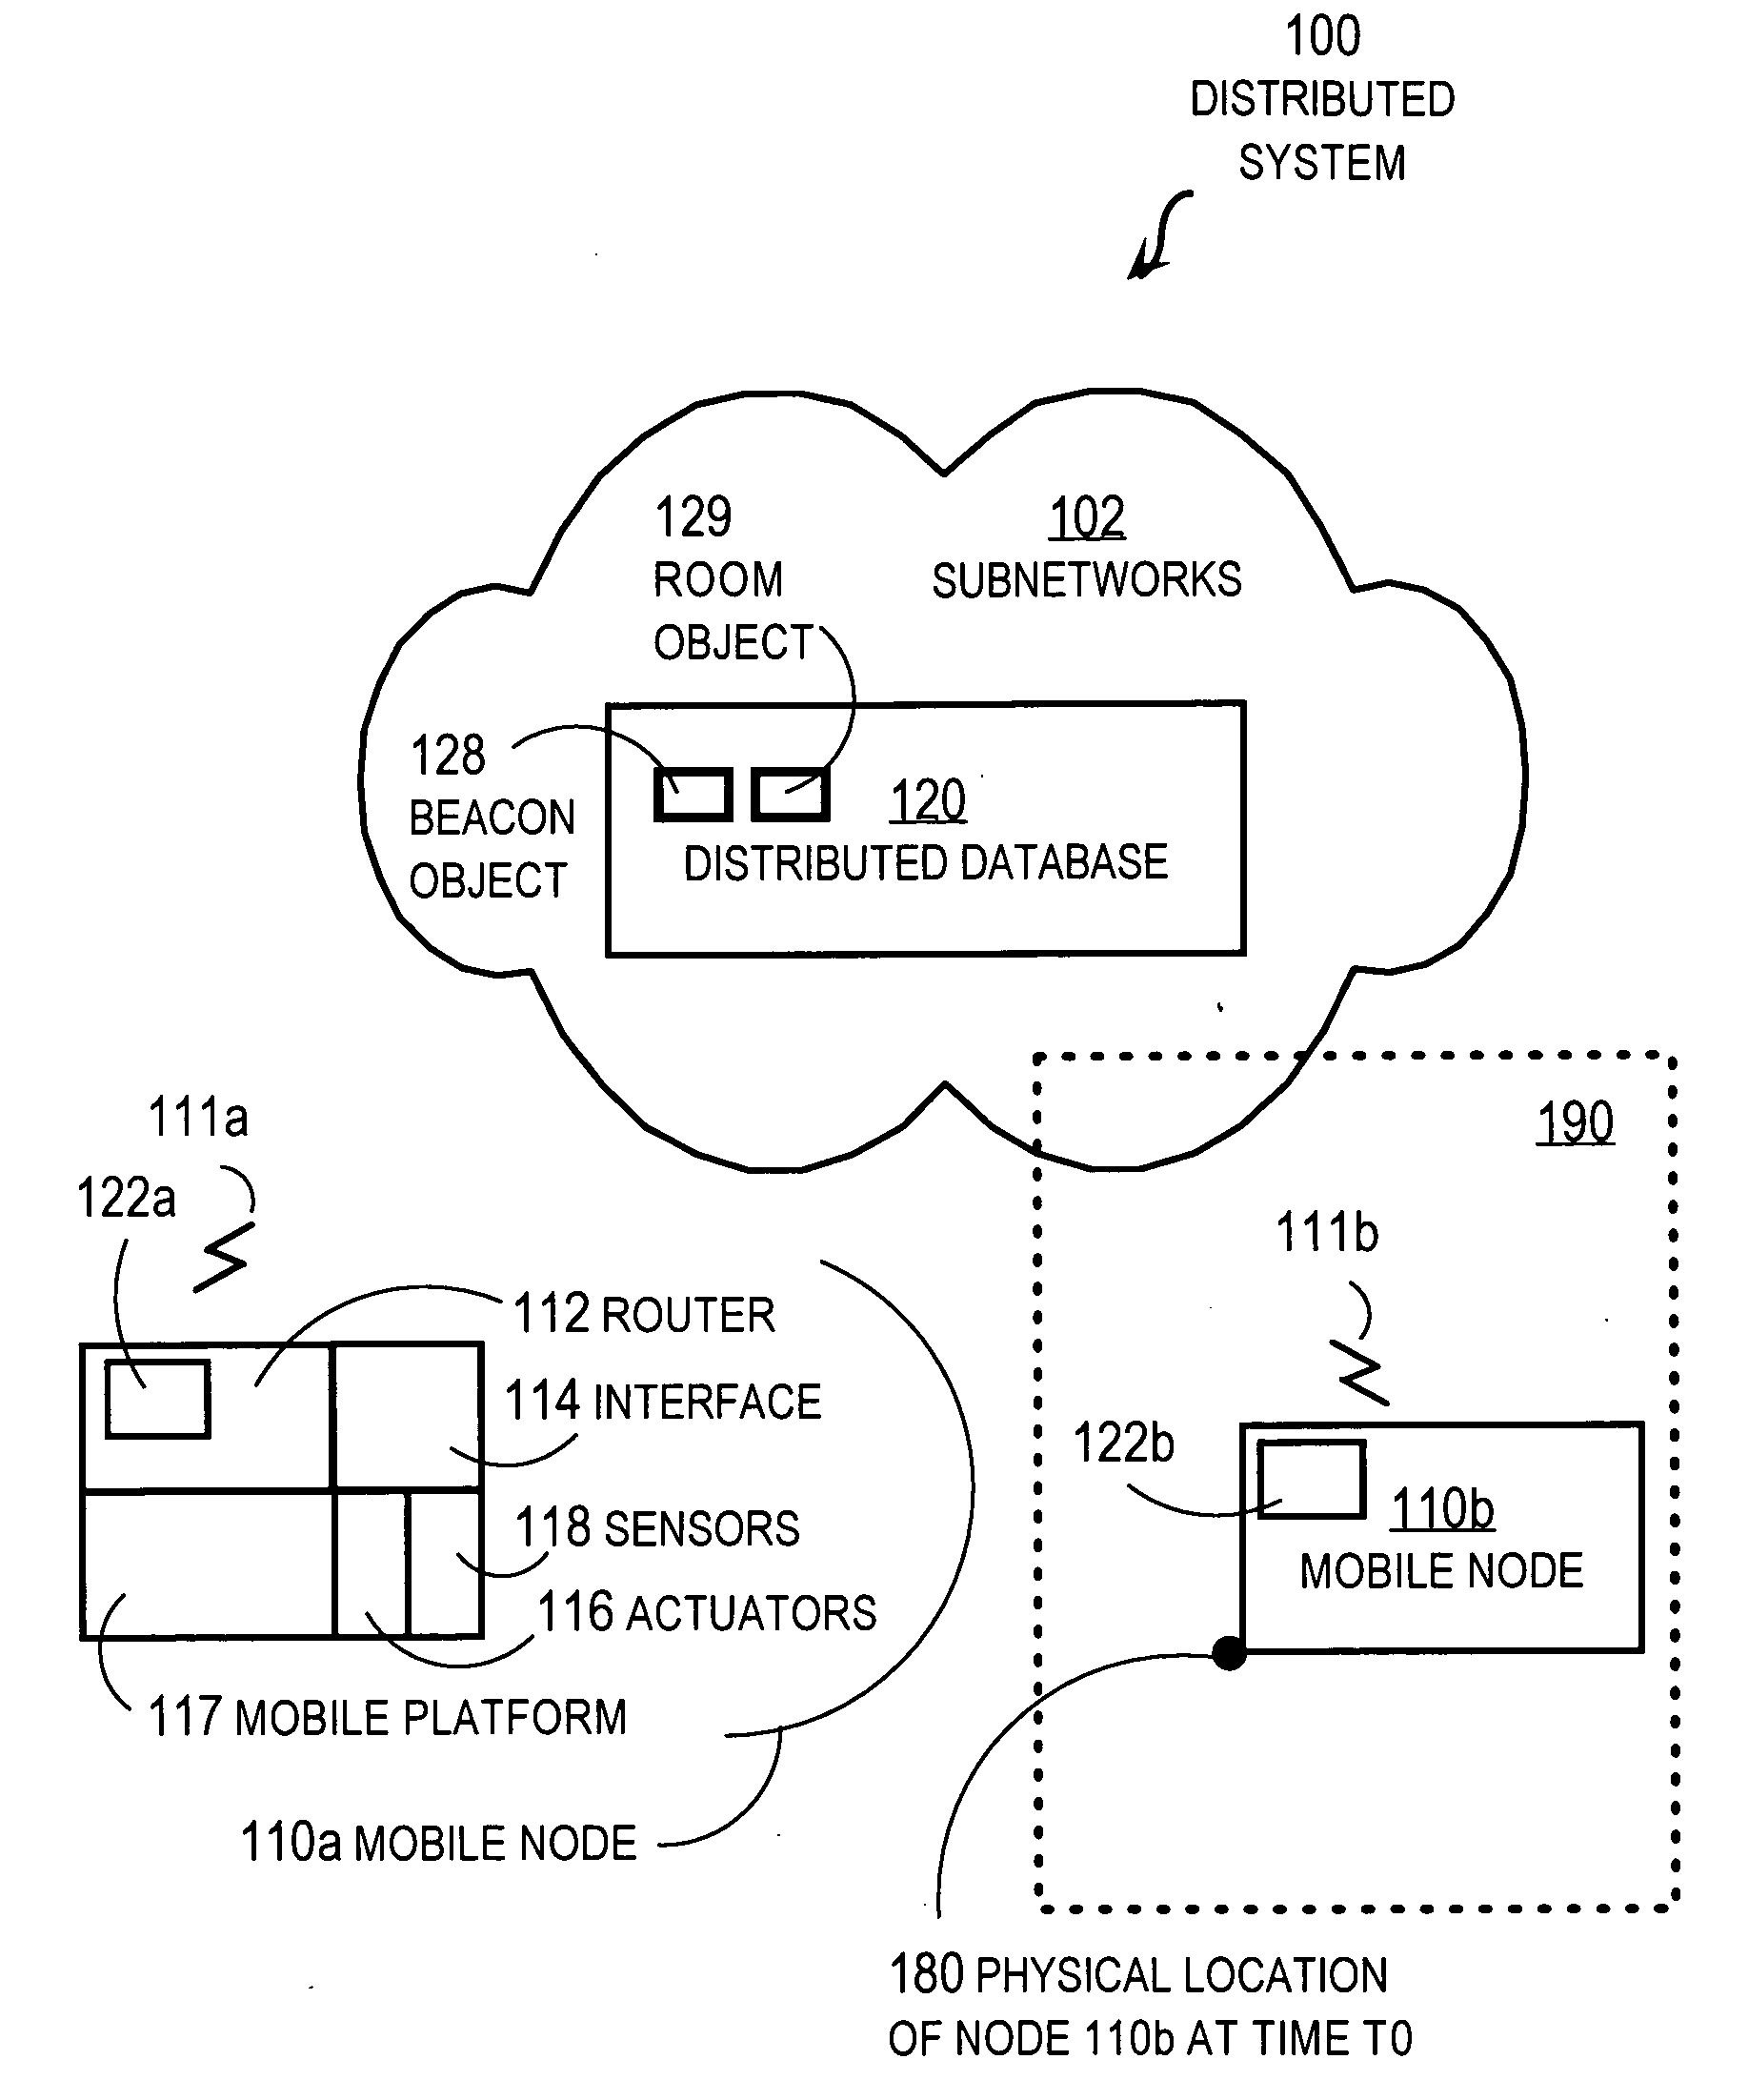 Techniques for distributing data among mobile nodes based on dynamically generated data objects in a distributed object-oriented database